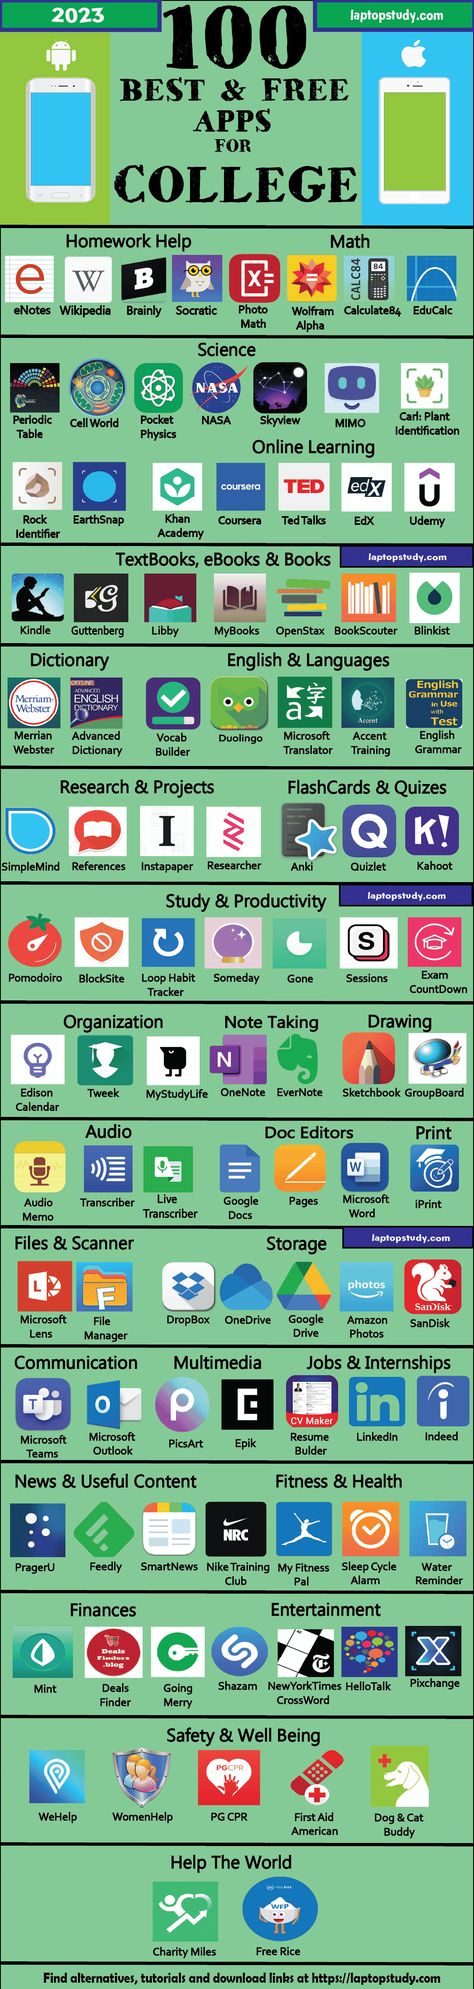 Apps For Research, Study Pack Apps Android, Computer Basics How To Use, Laptop Recommendations For Students, App For College Students, Apps For Studying Colleges, Apps Useful For Students, Sites For College Students, Mac Apps For College Students